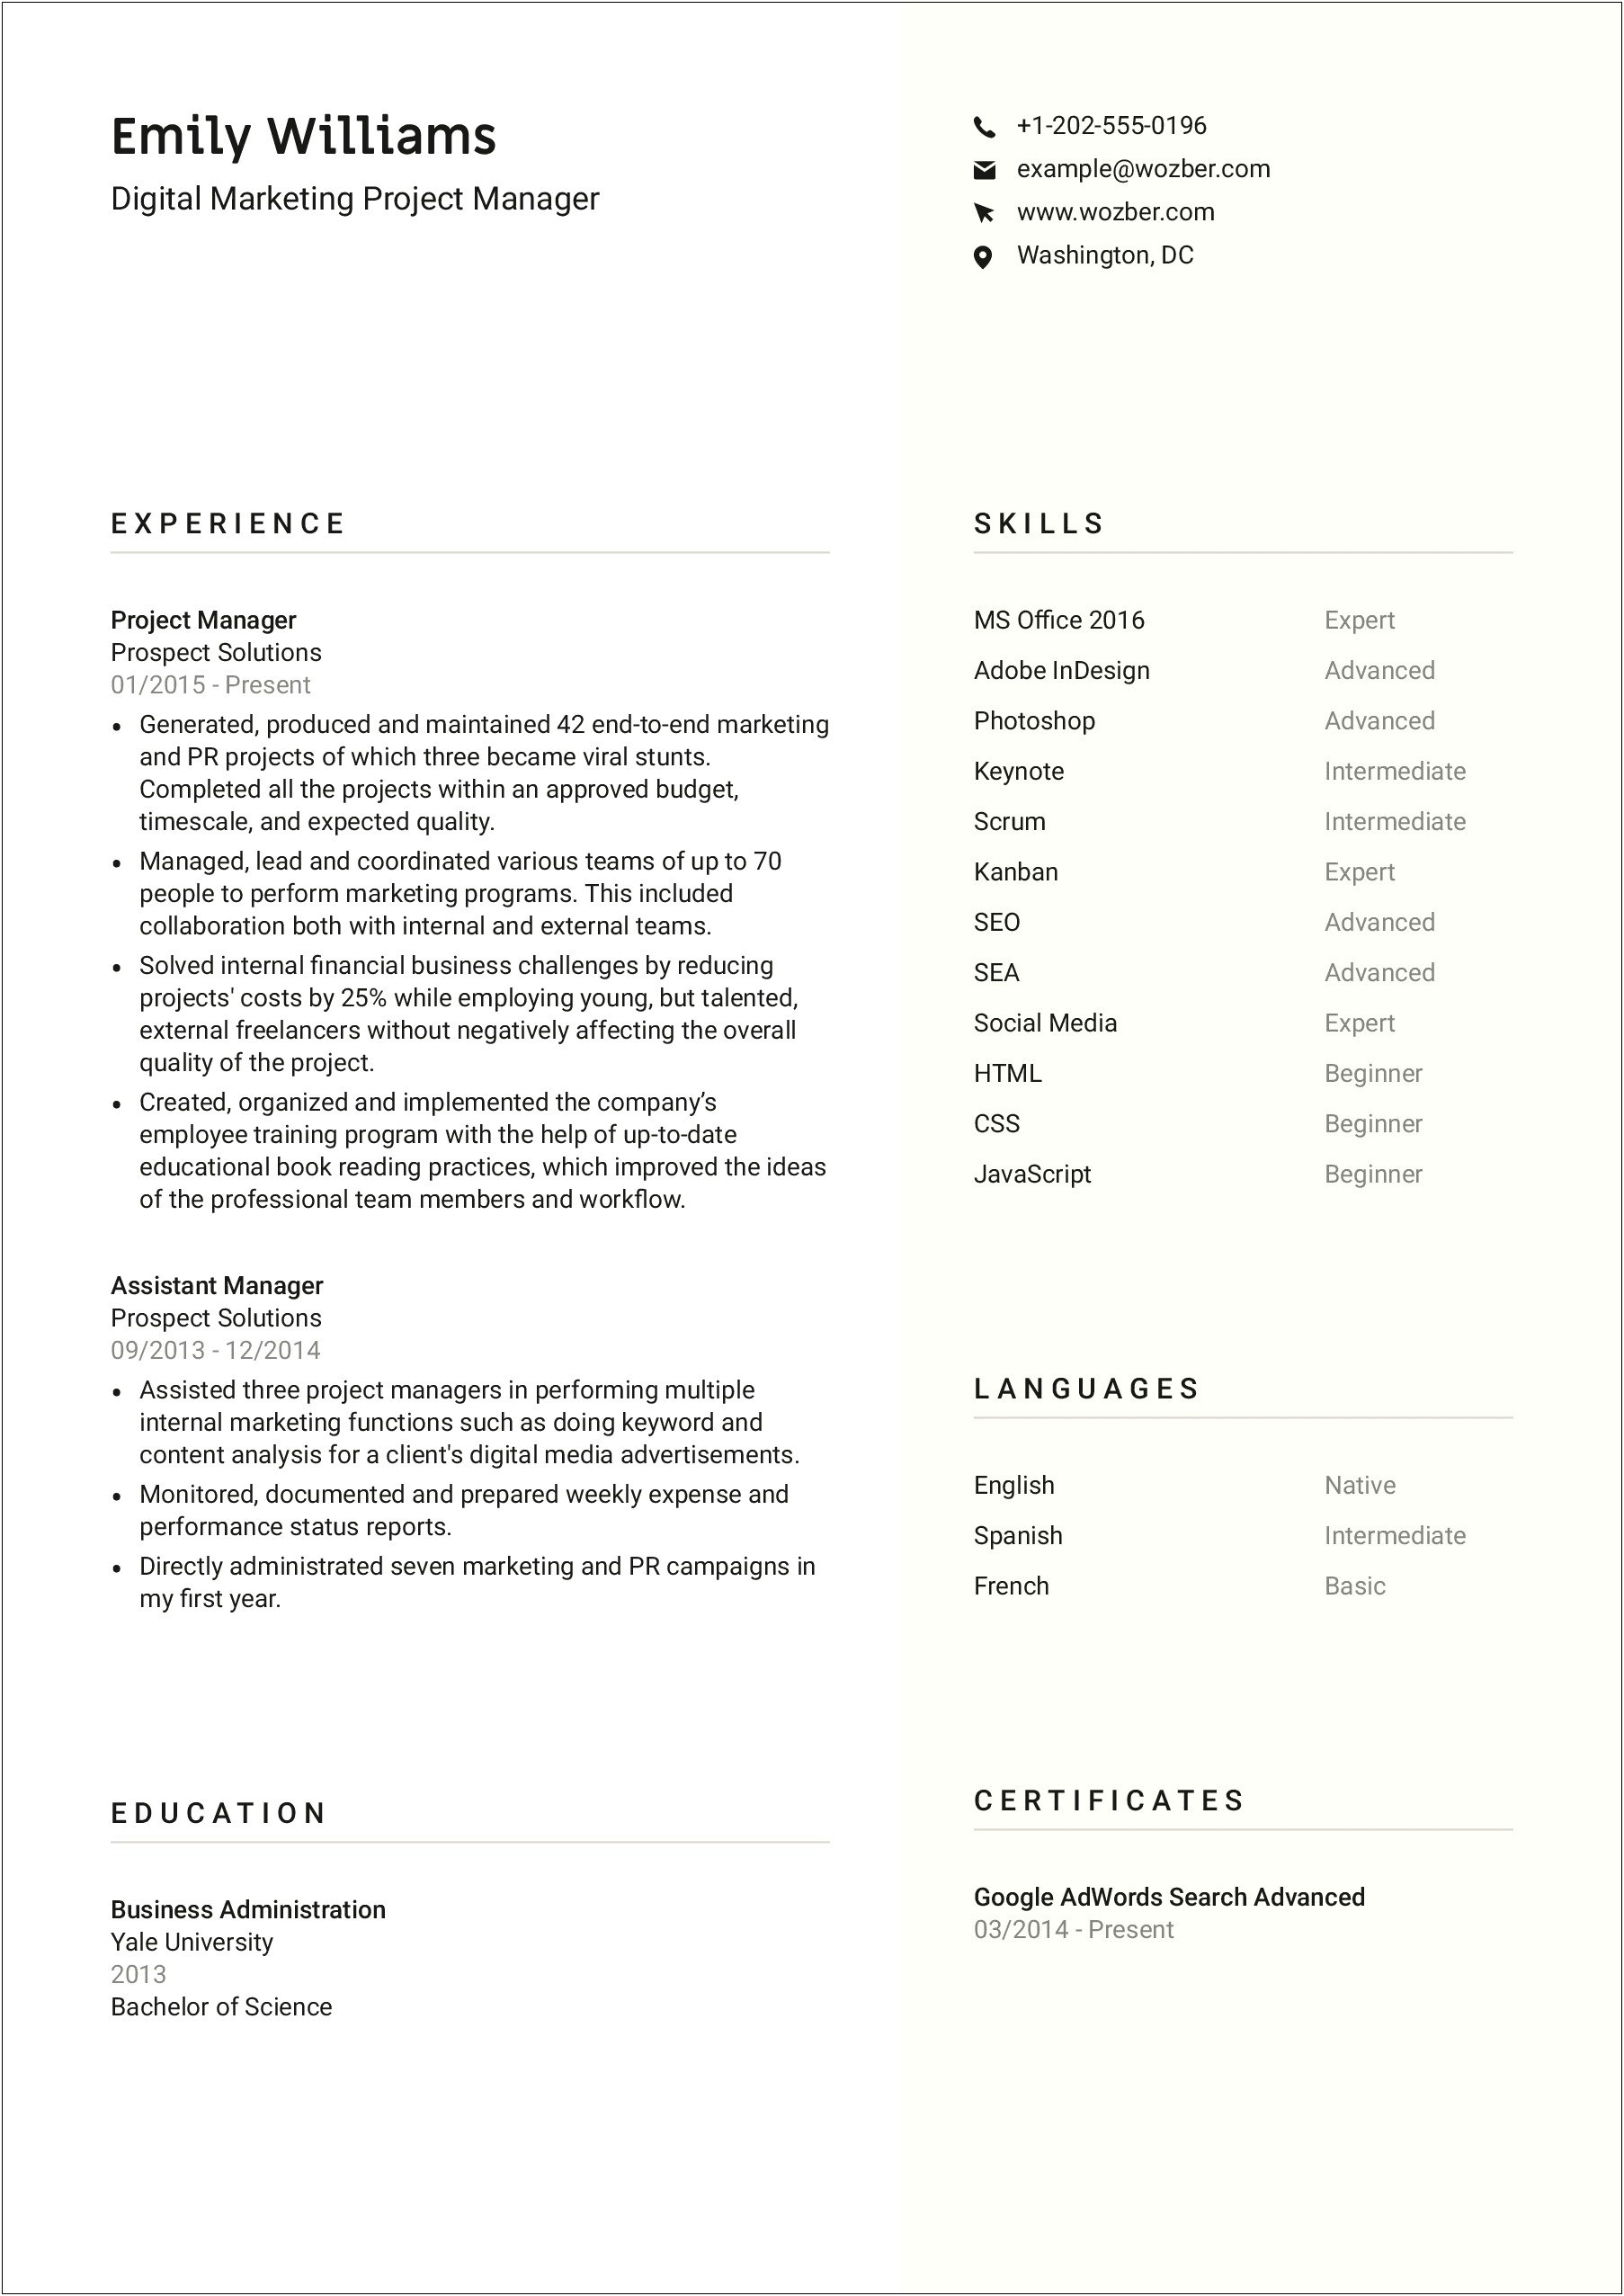 Agile Project Manager Resume Samples